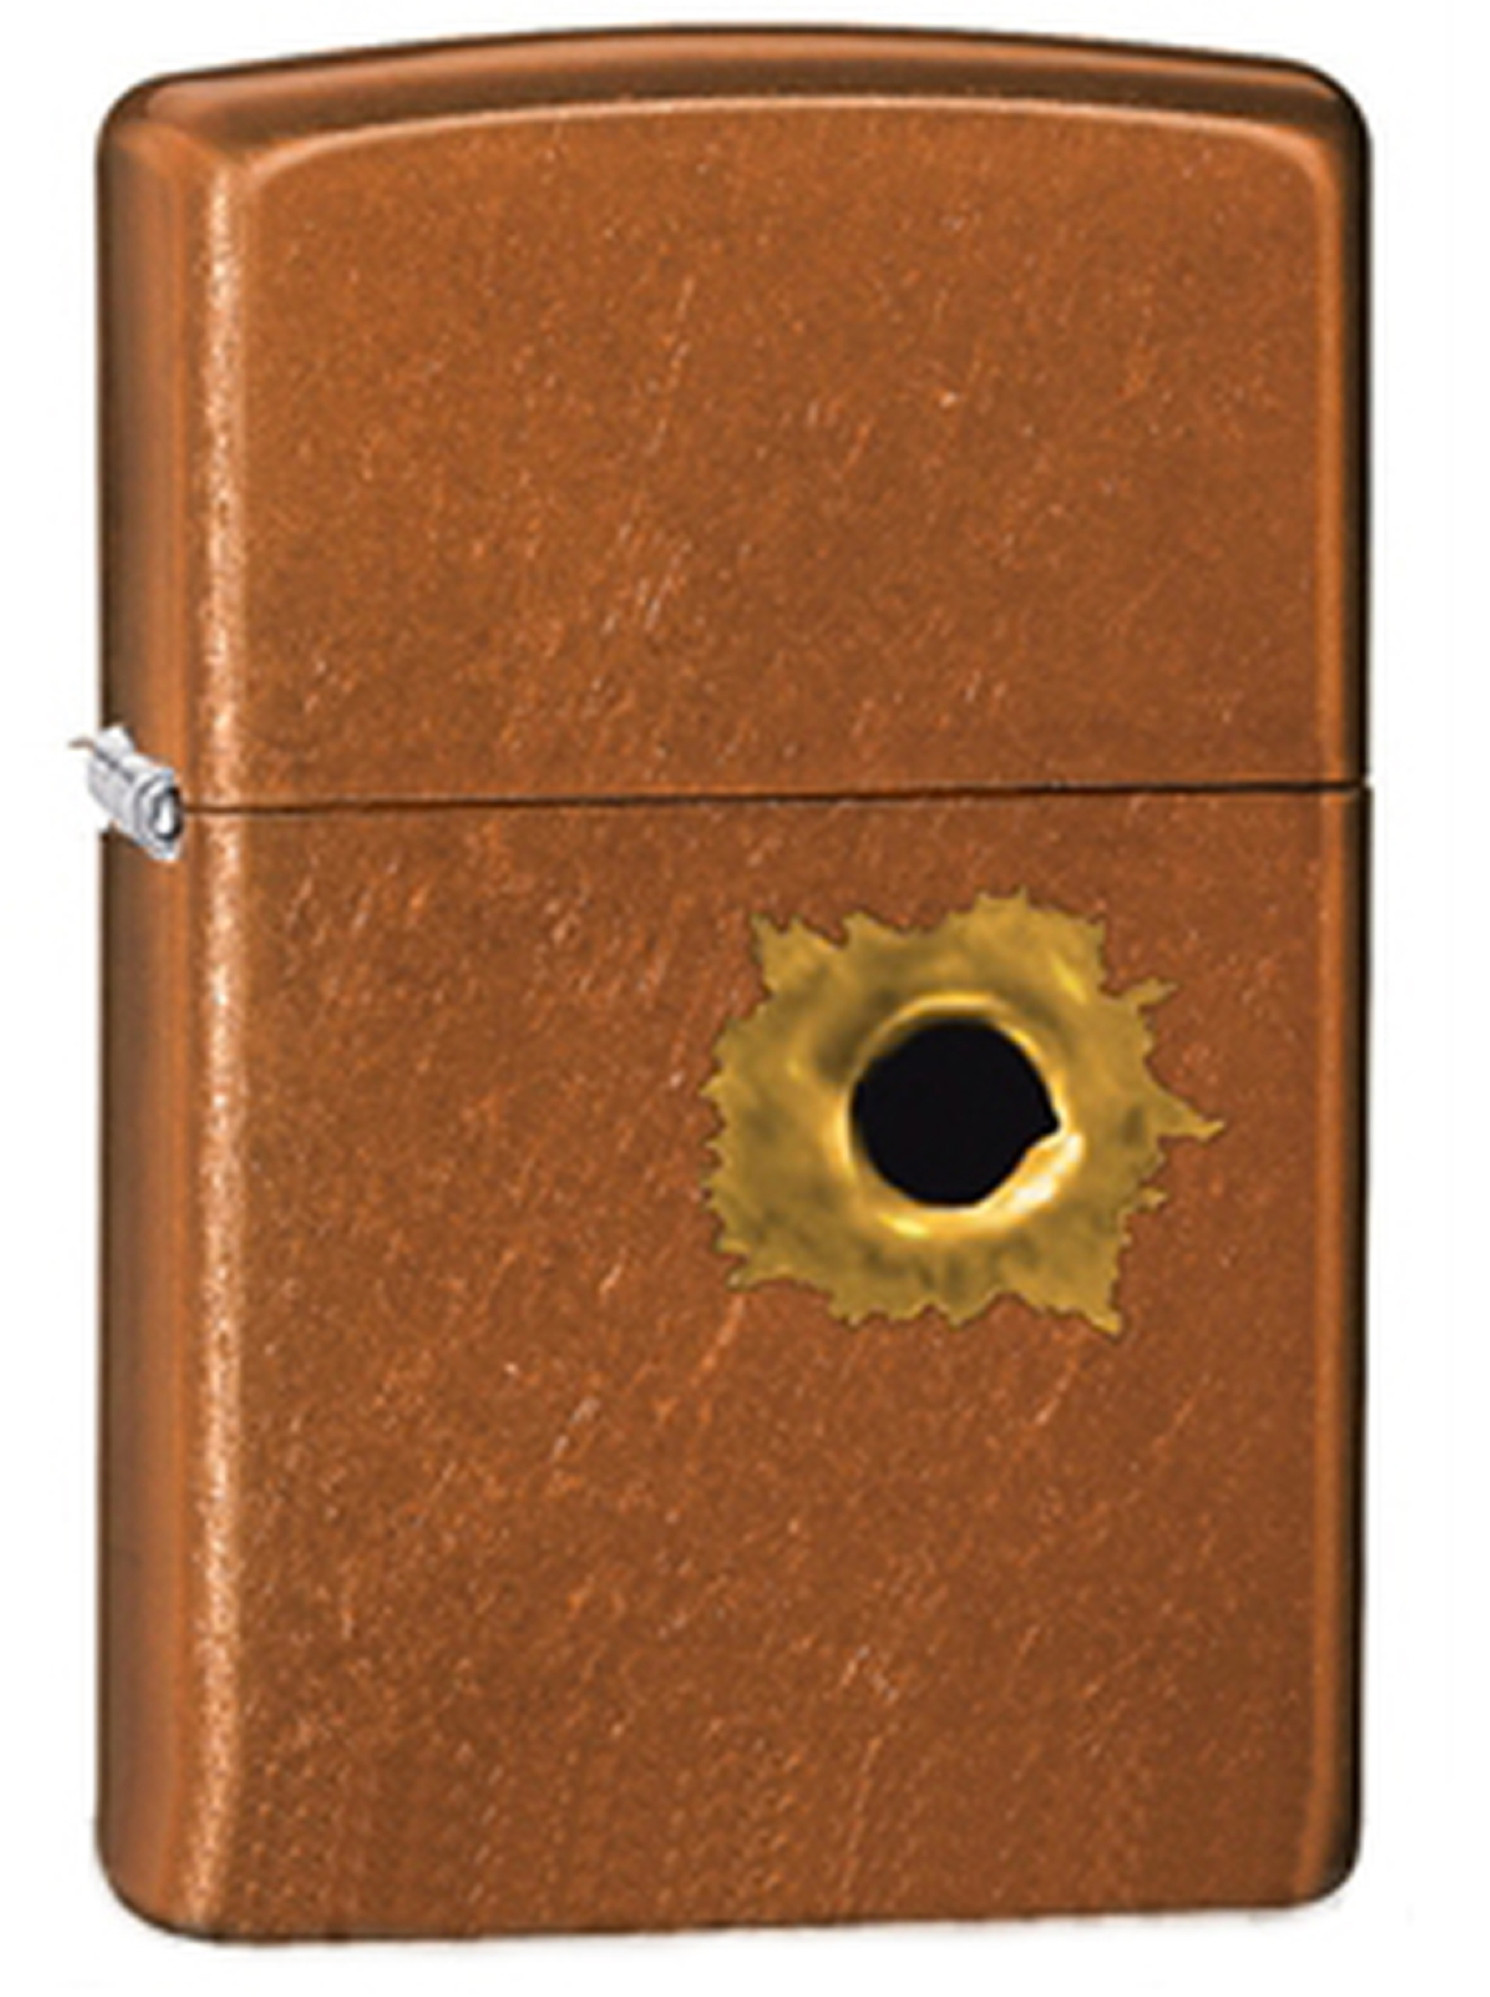 Zippo Classic Lighter - Bullethole (Toffee)